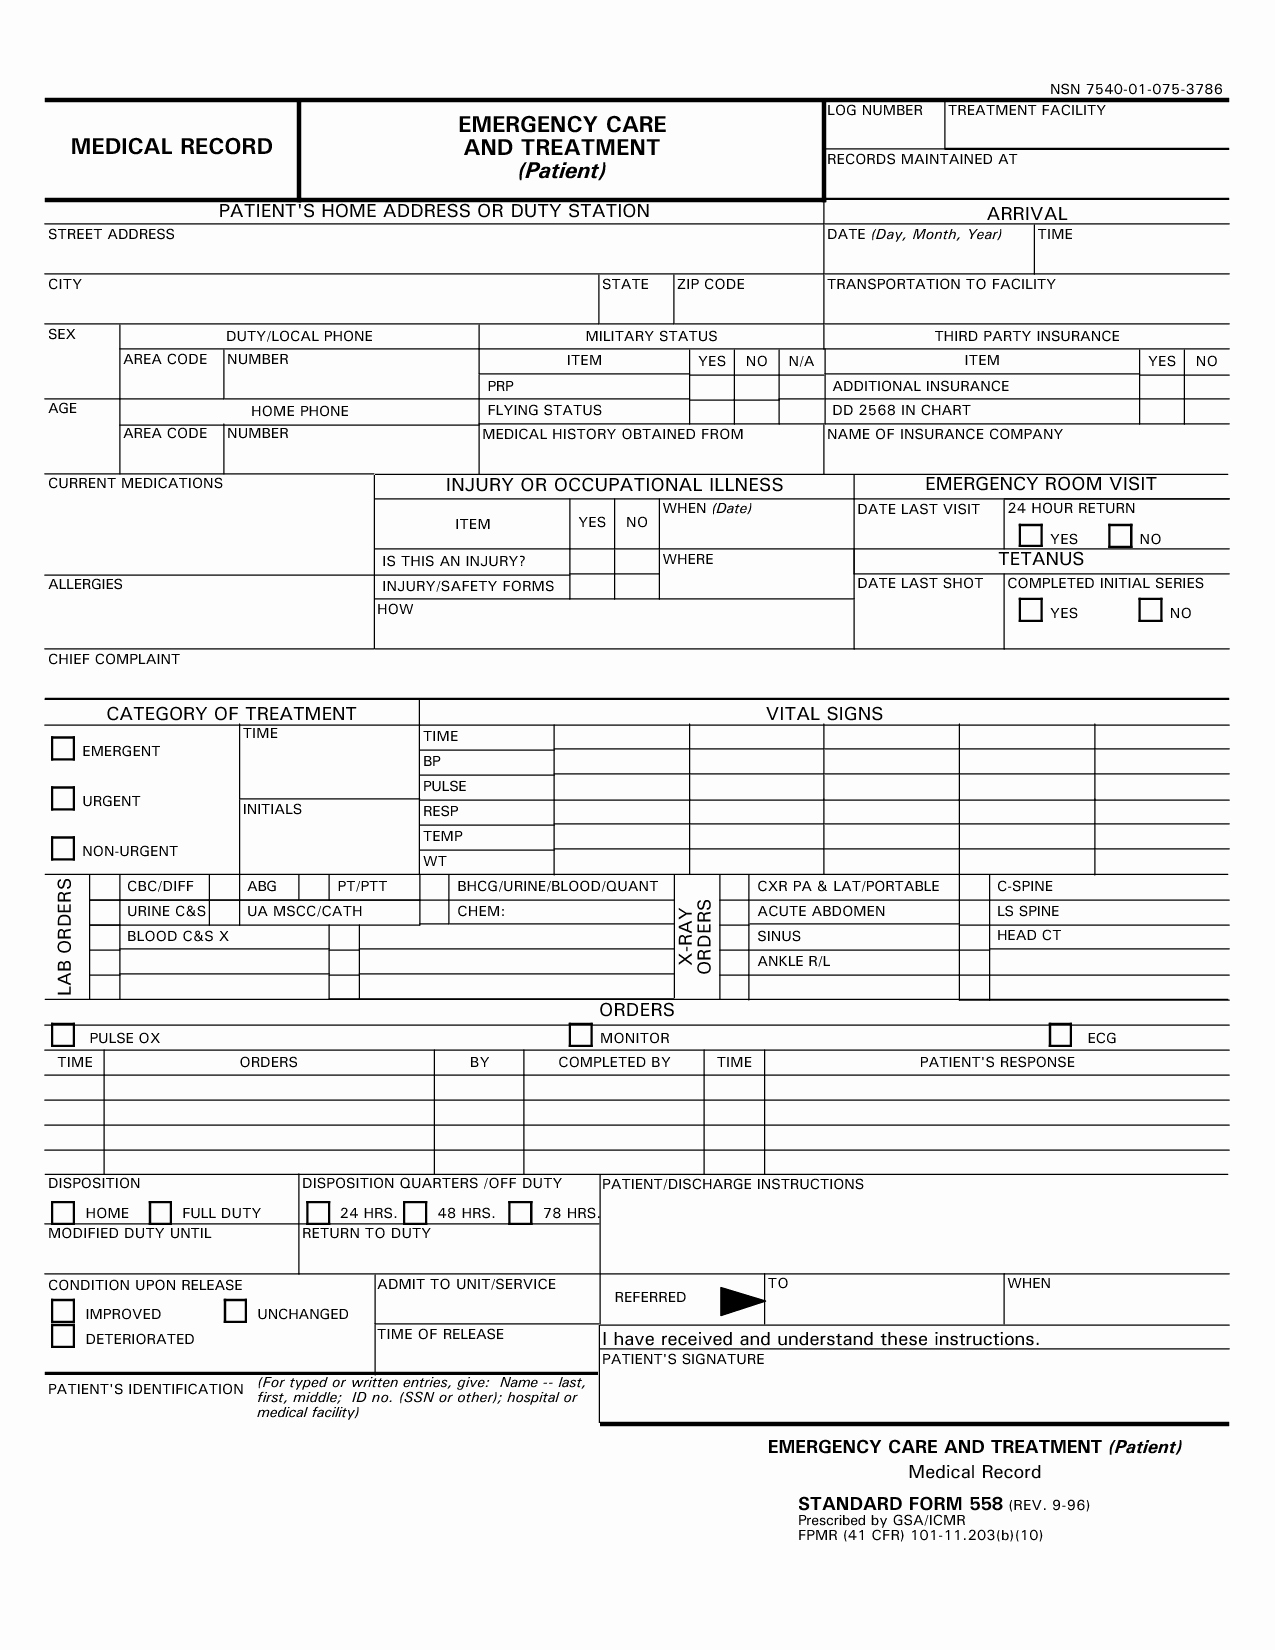 Medical Record forms Template Fresh Medical Record Templates